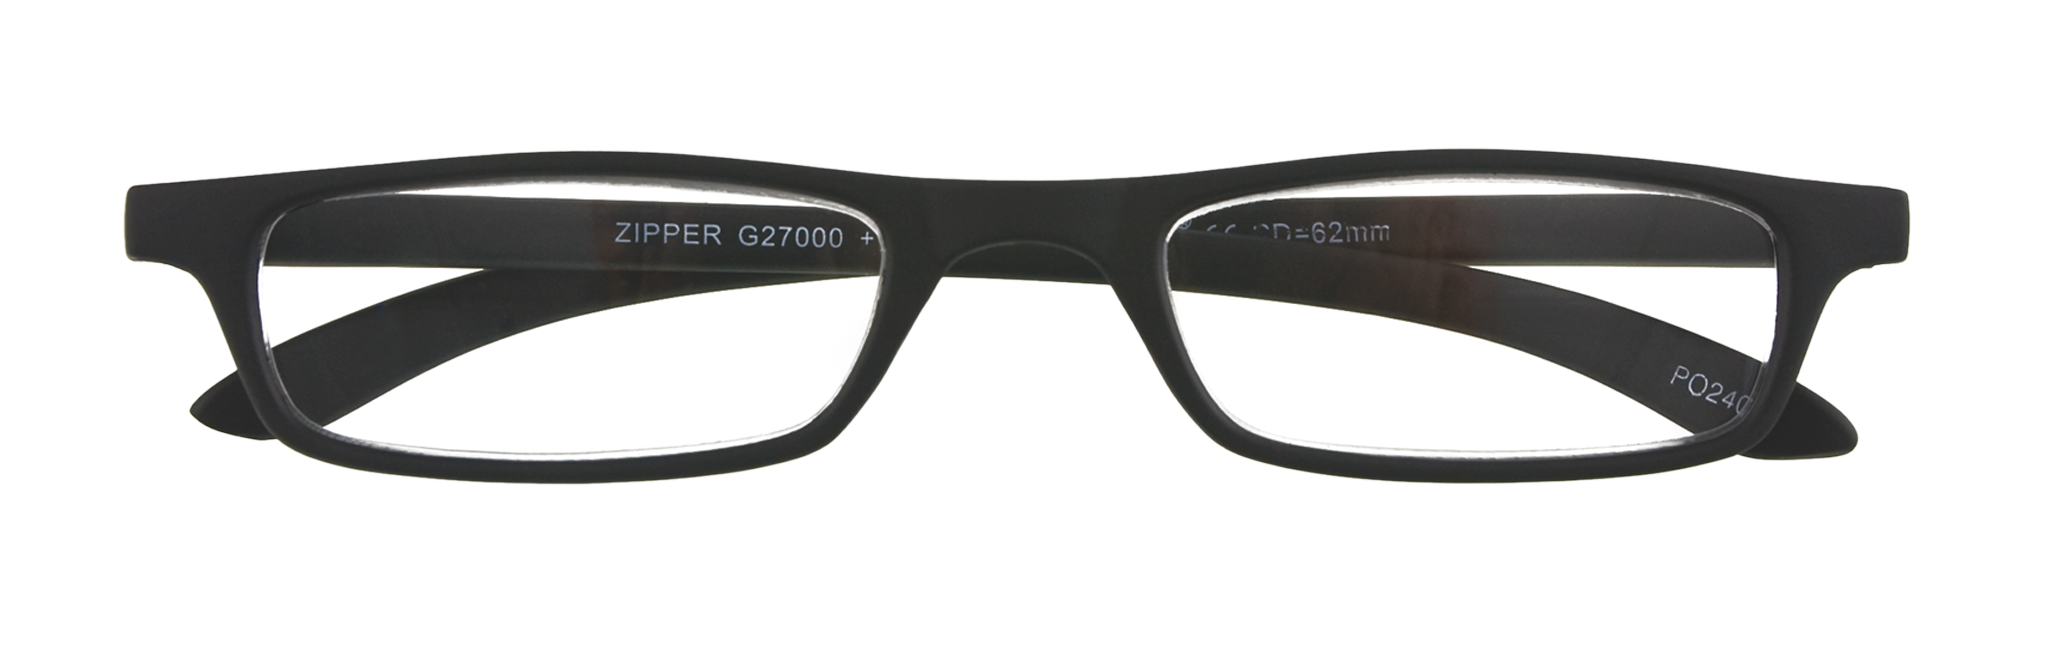 Zipper Black Readers by I Need You Readers